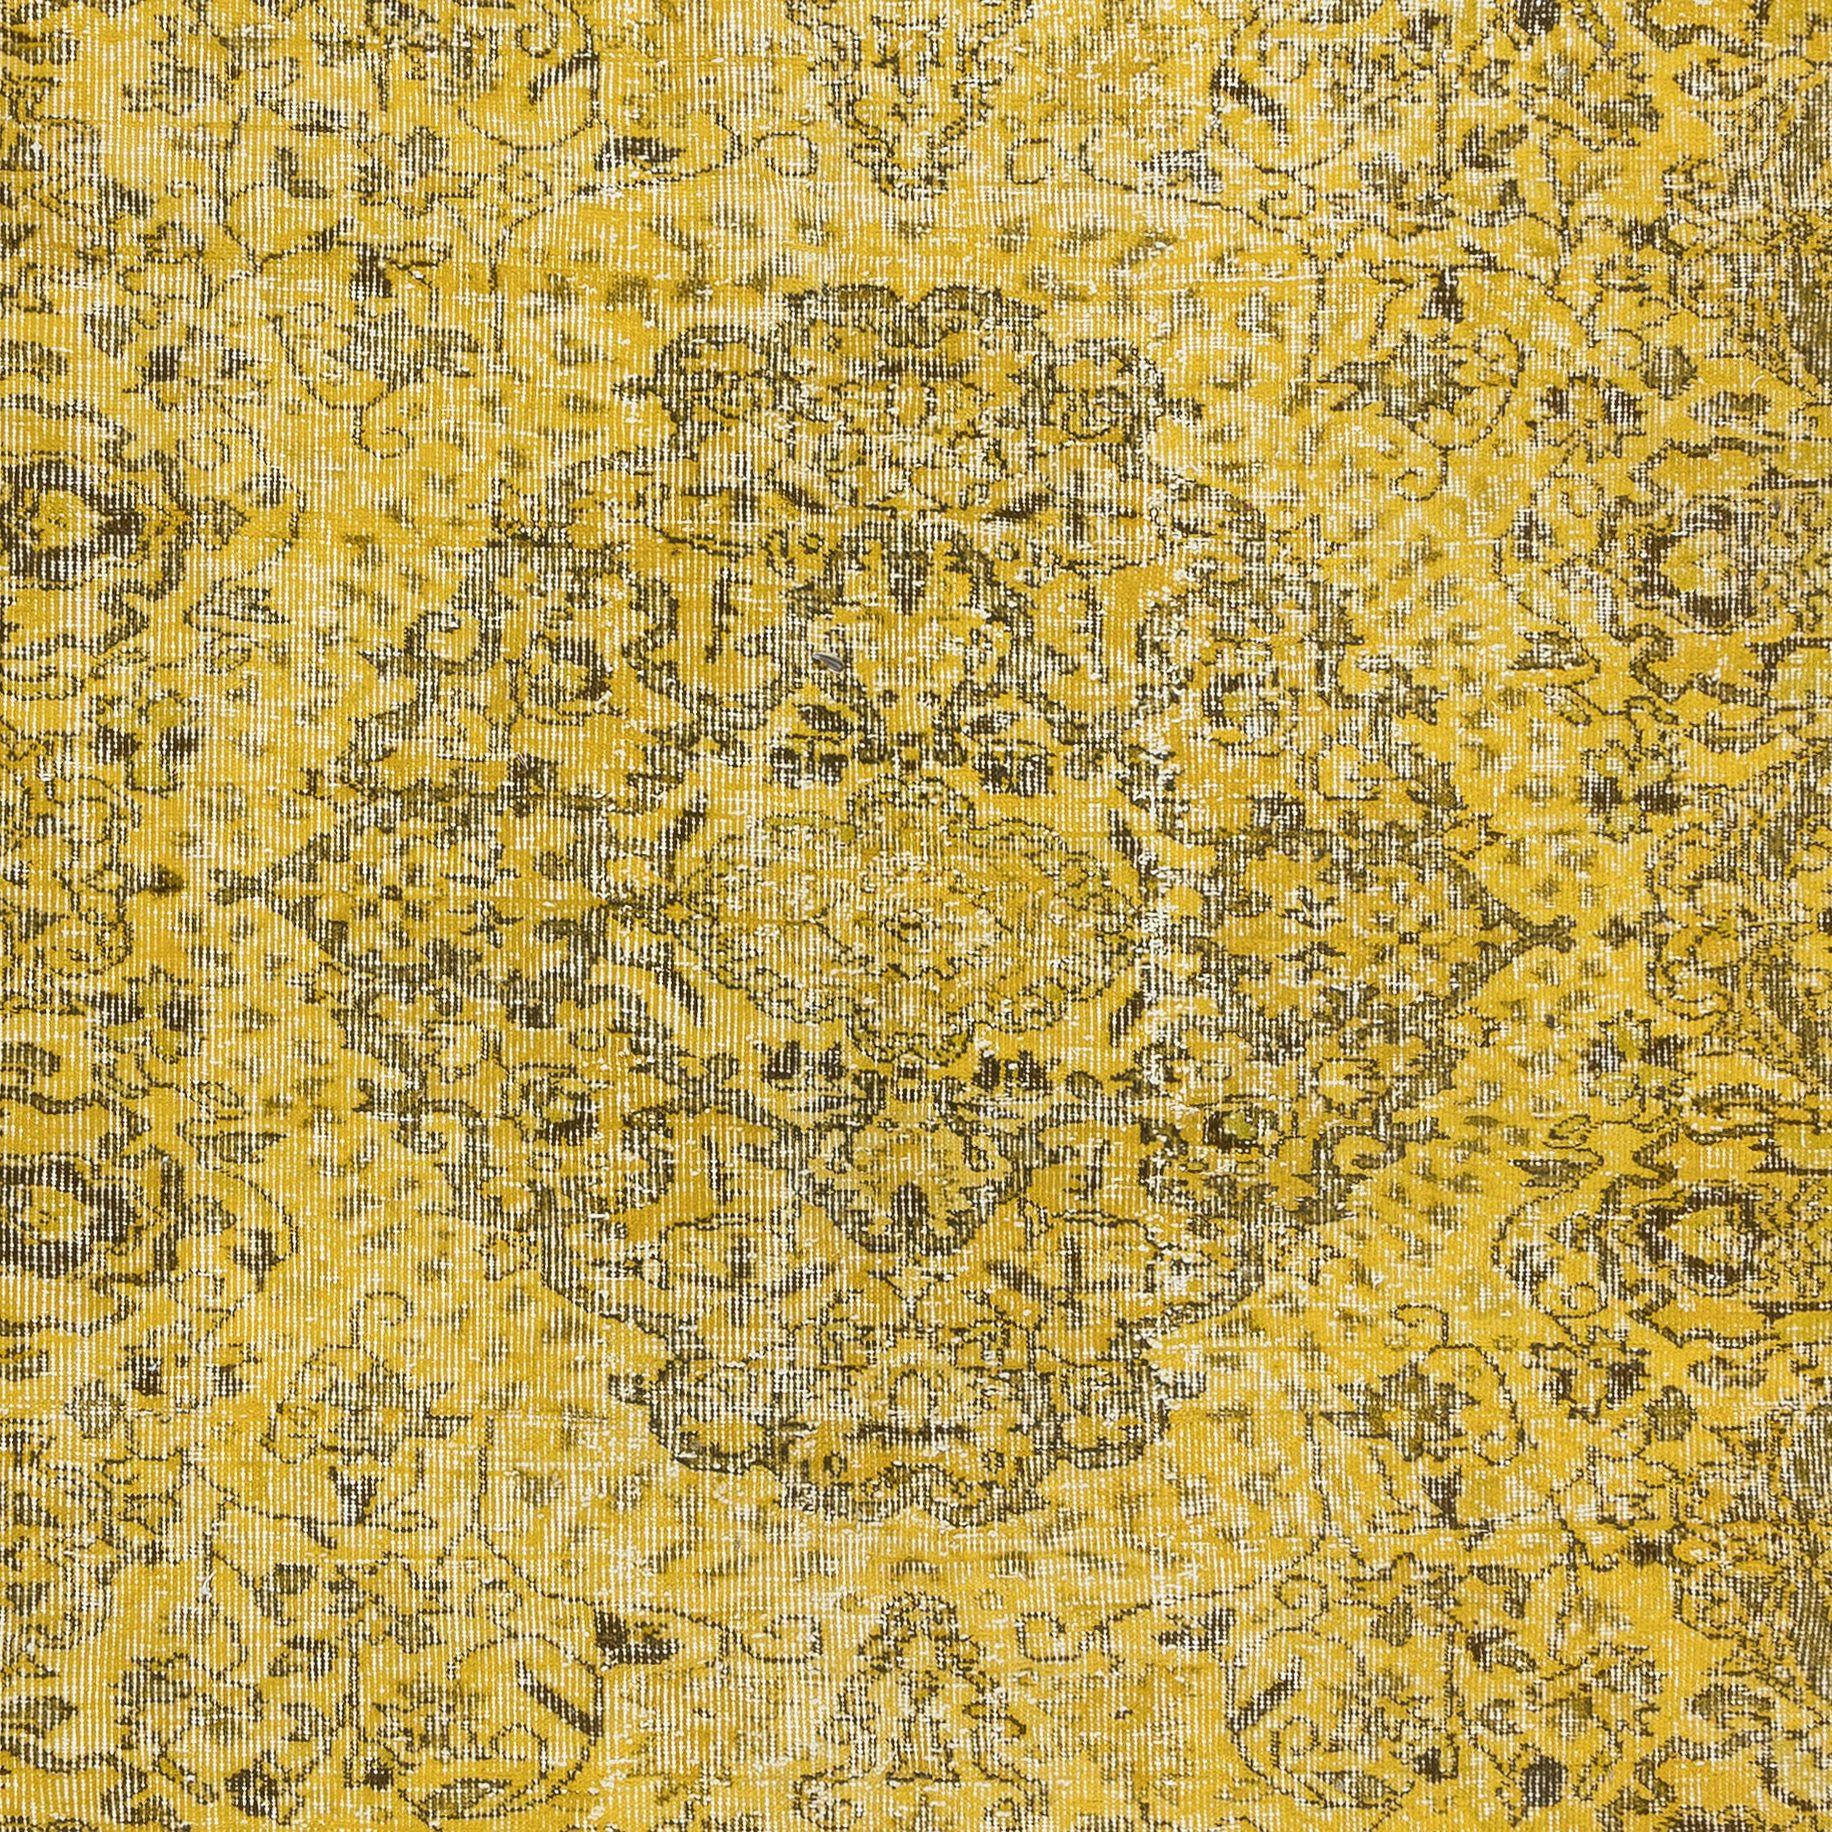 Modern 5.4x8.6 Ft Decorative Handmade Turkish Area Rug in Yellow with Medallion Design For Sale